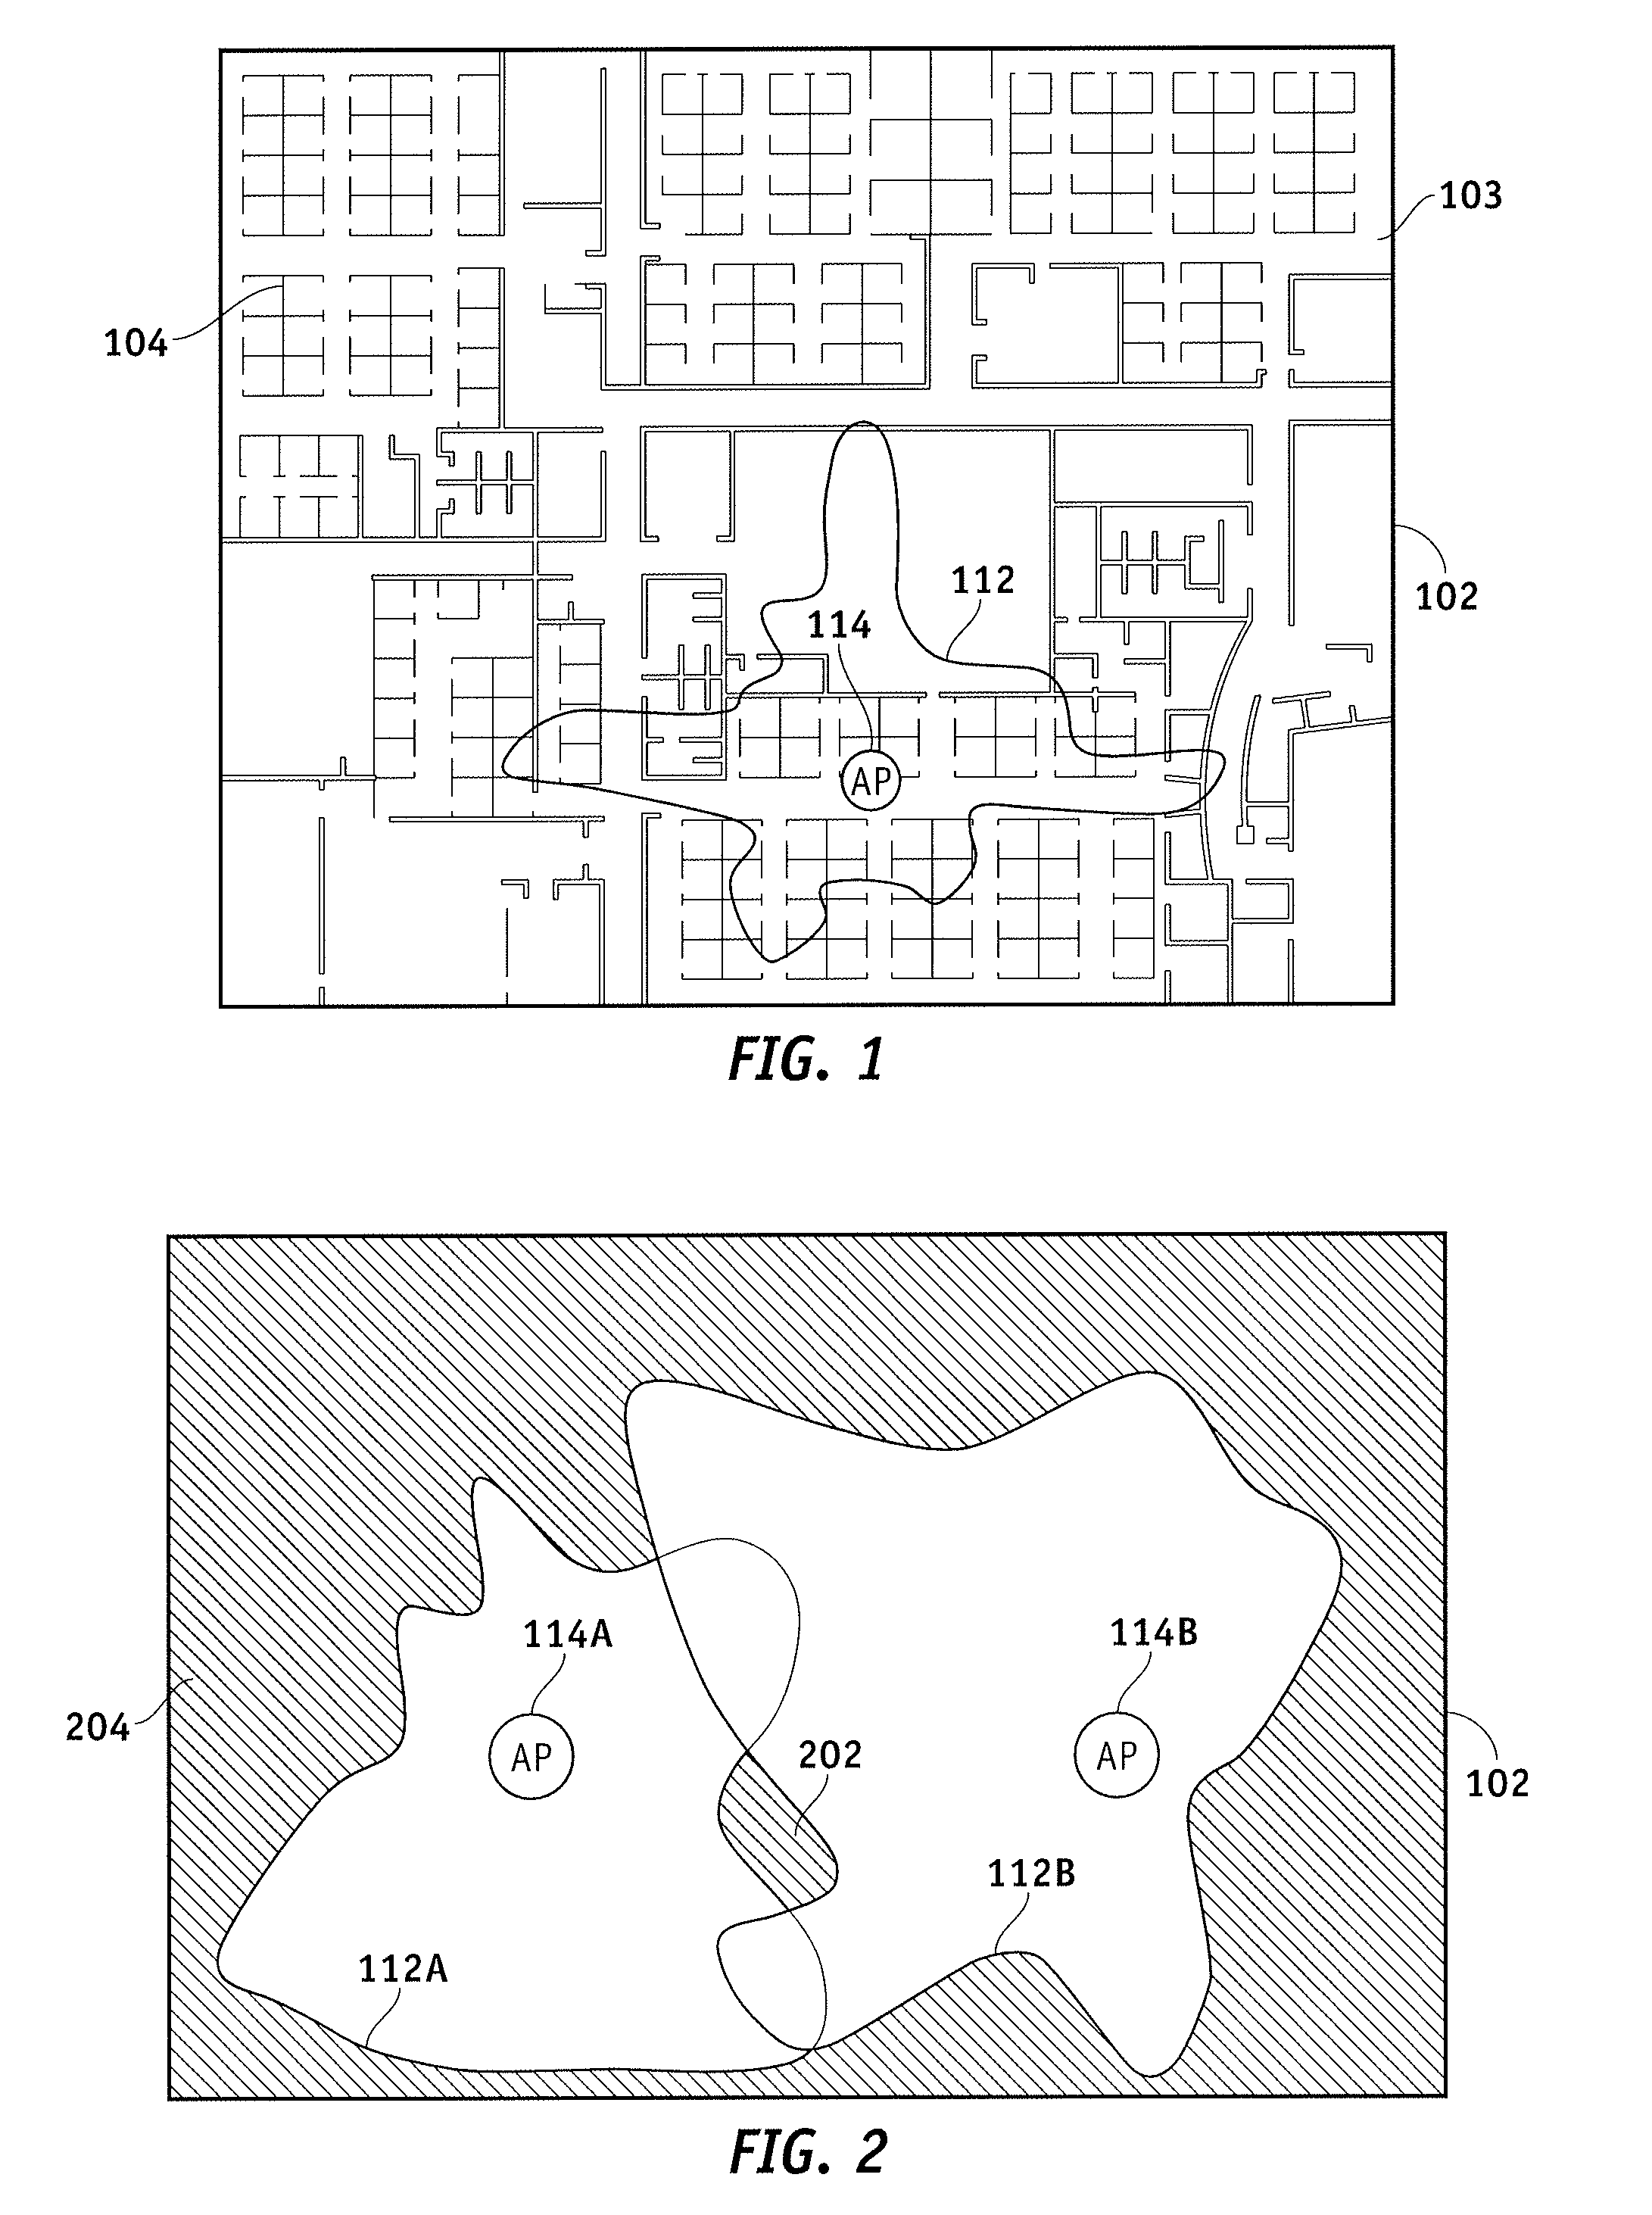 Methods and apparatus for determining RF transmitter placement via local coverage optimization